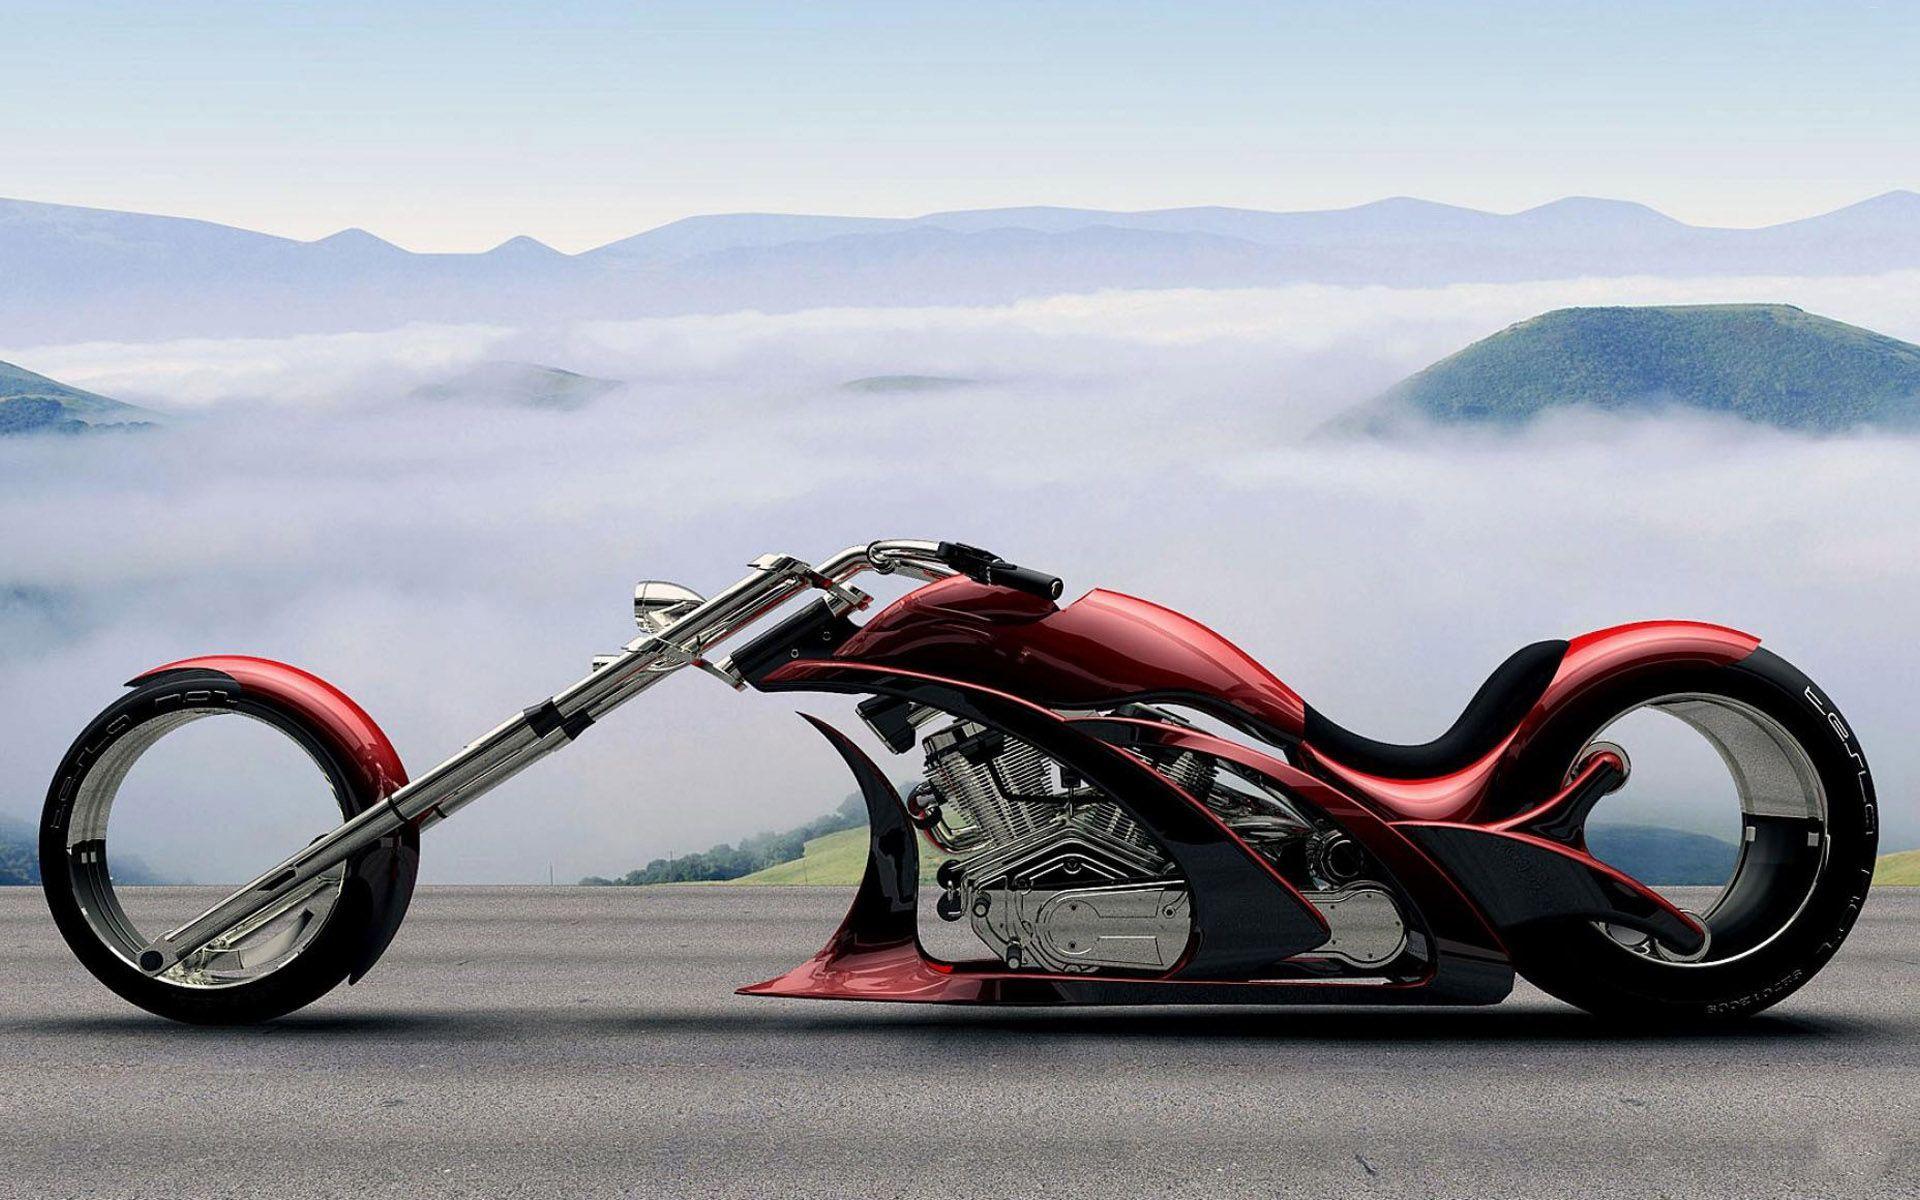 American Choppers HD Resolutions Wallpaper. Motorcycle HD